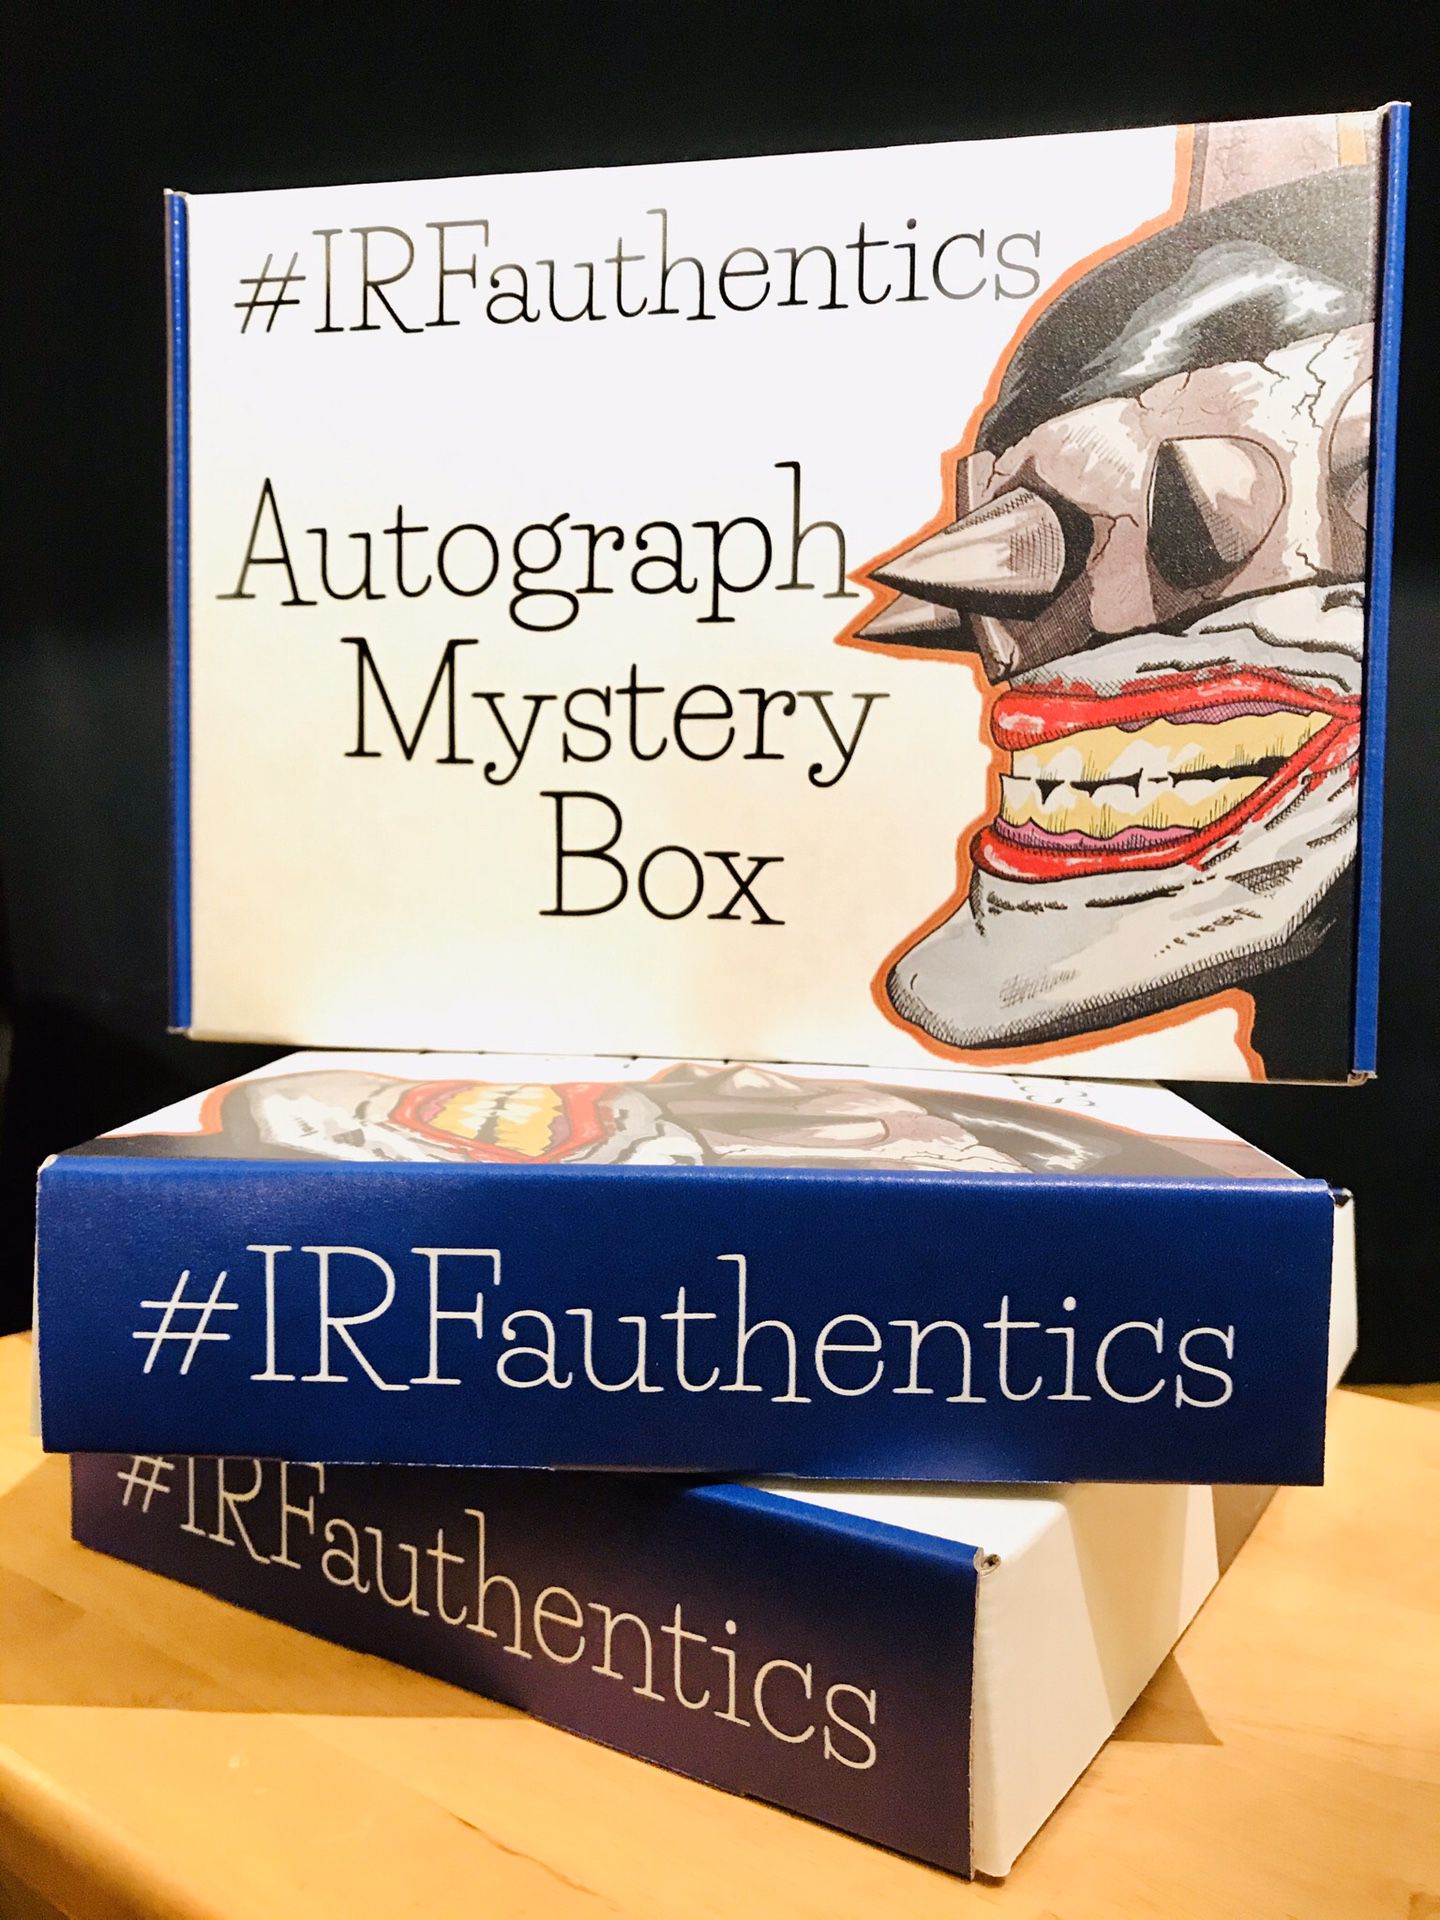 Autographed Mystery Boxes filled with signed Comic Books Funko Pops Action Figures Prints Original Art Posters and MORE